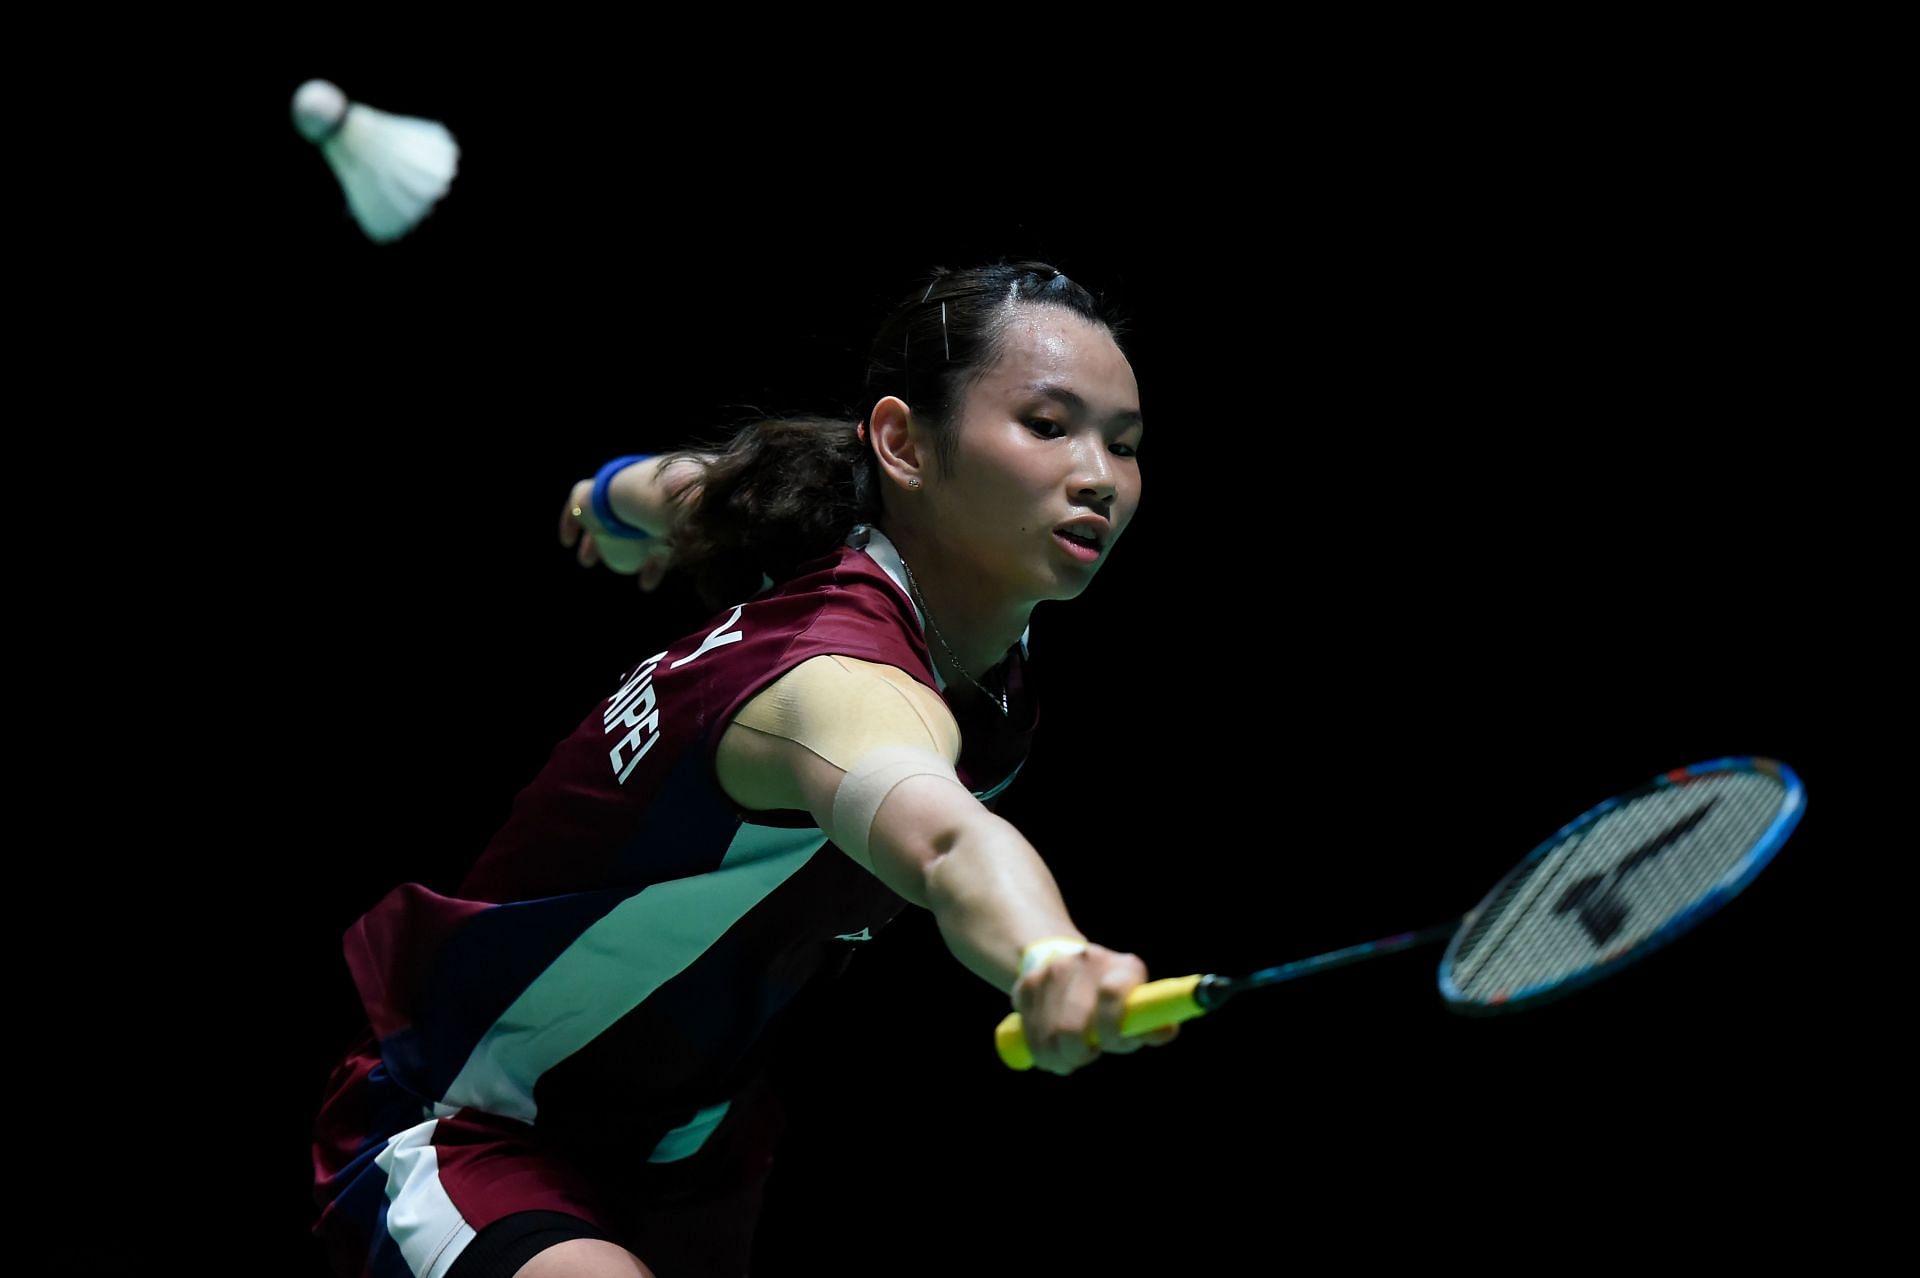 BWF World Championships 2021 Preview Where to watch, live stream details, TV schedule and more